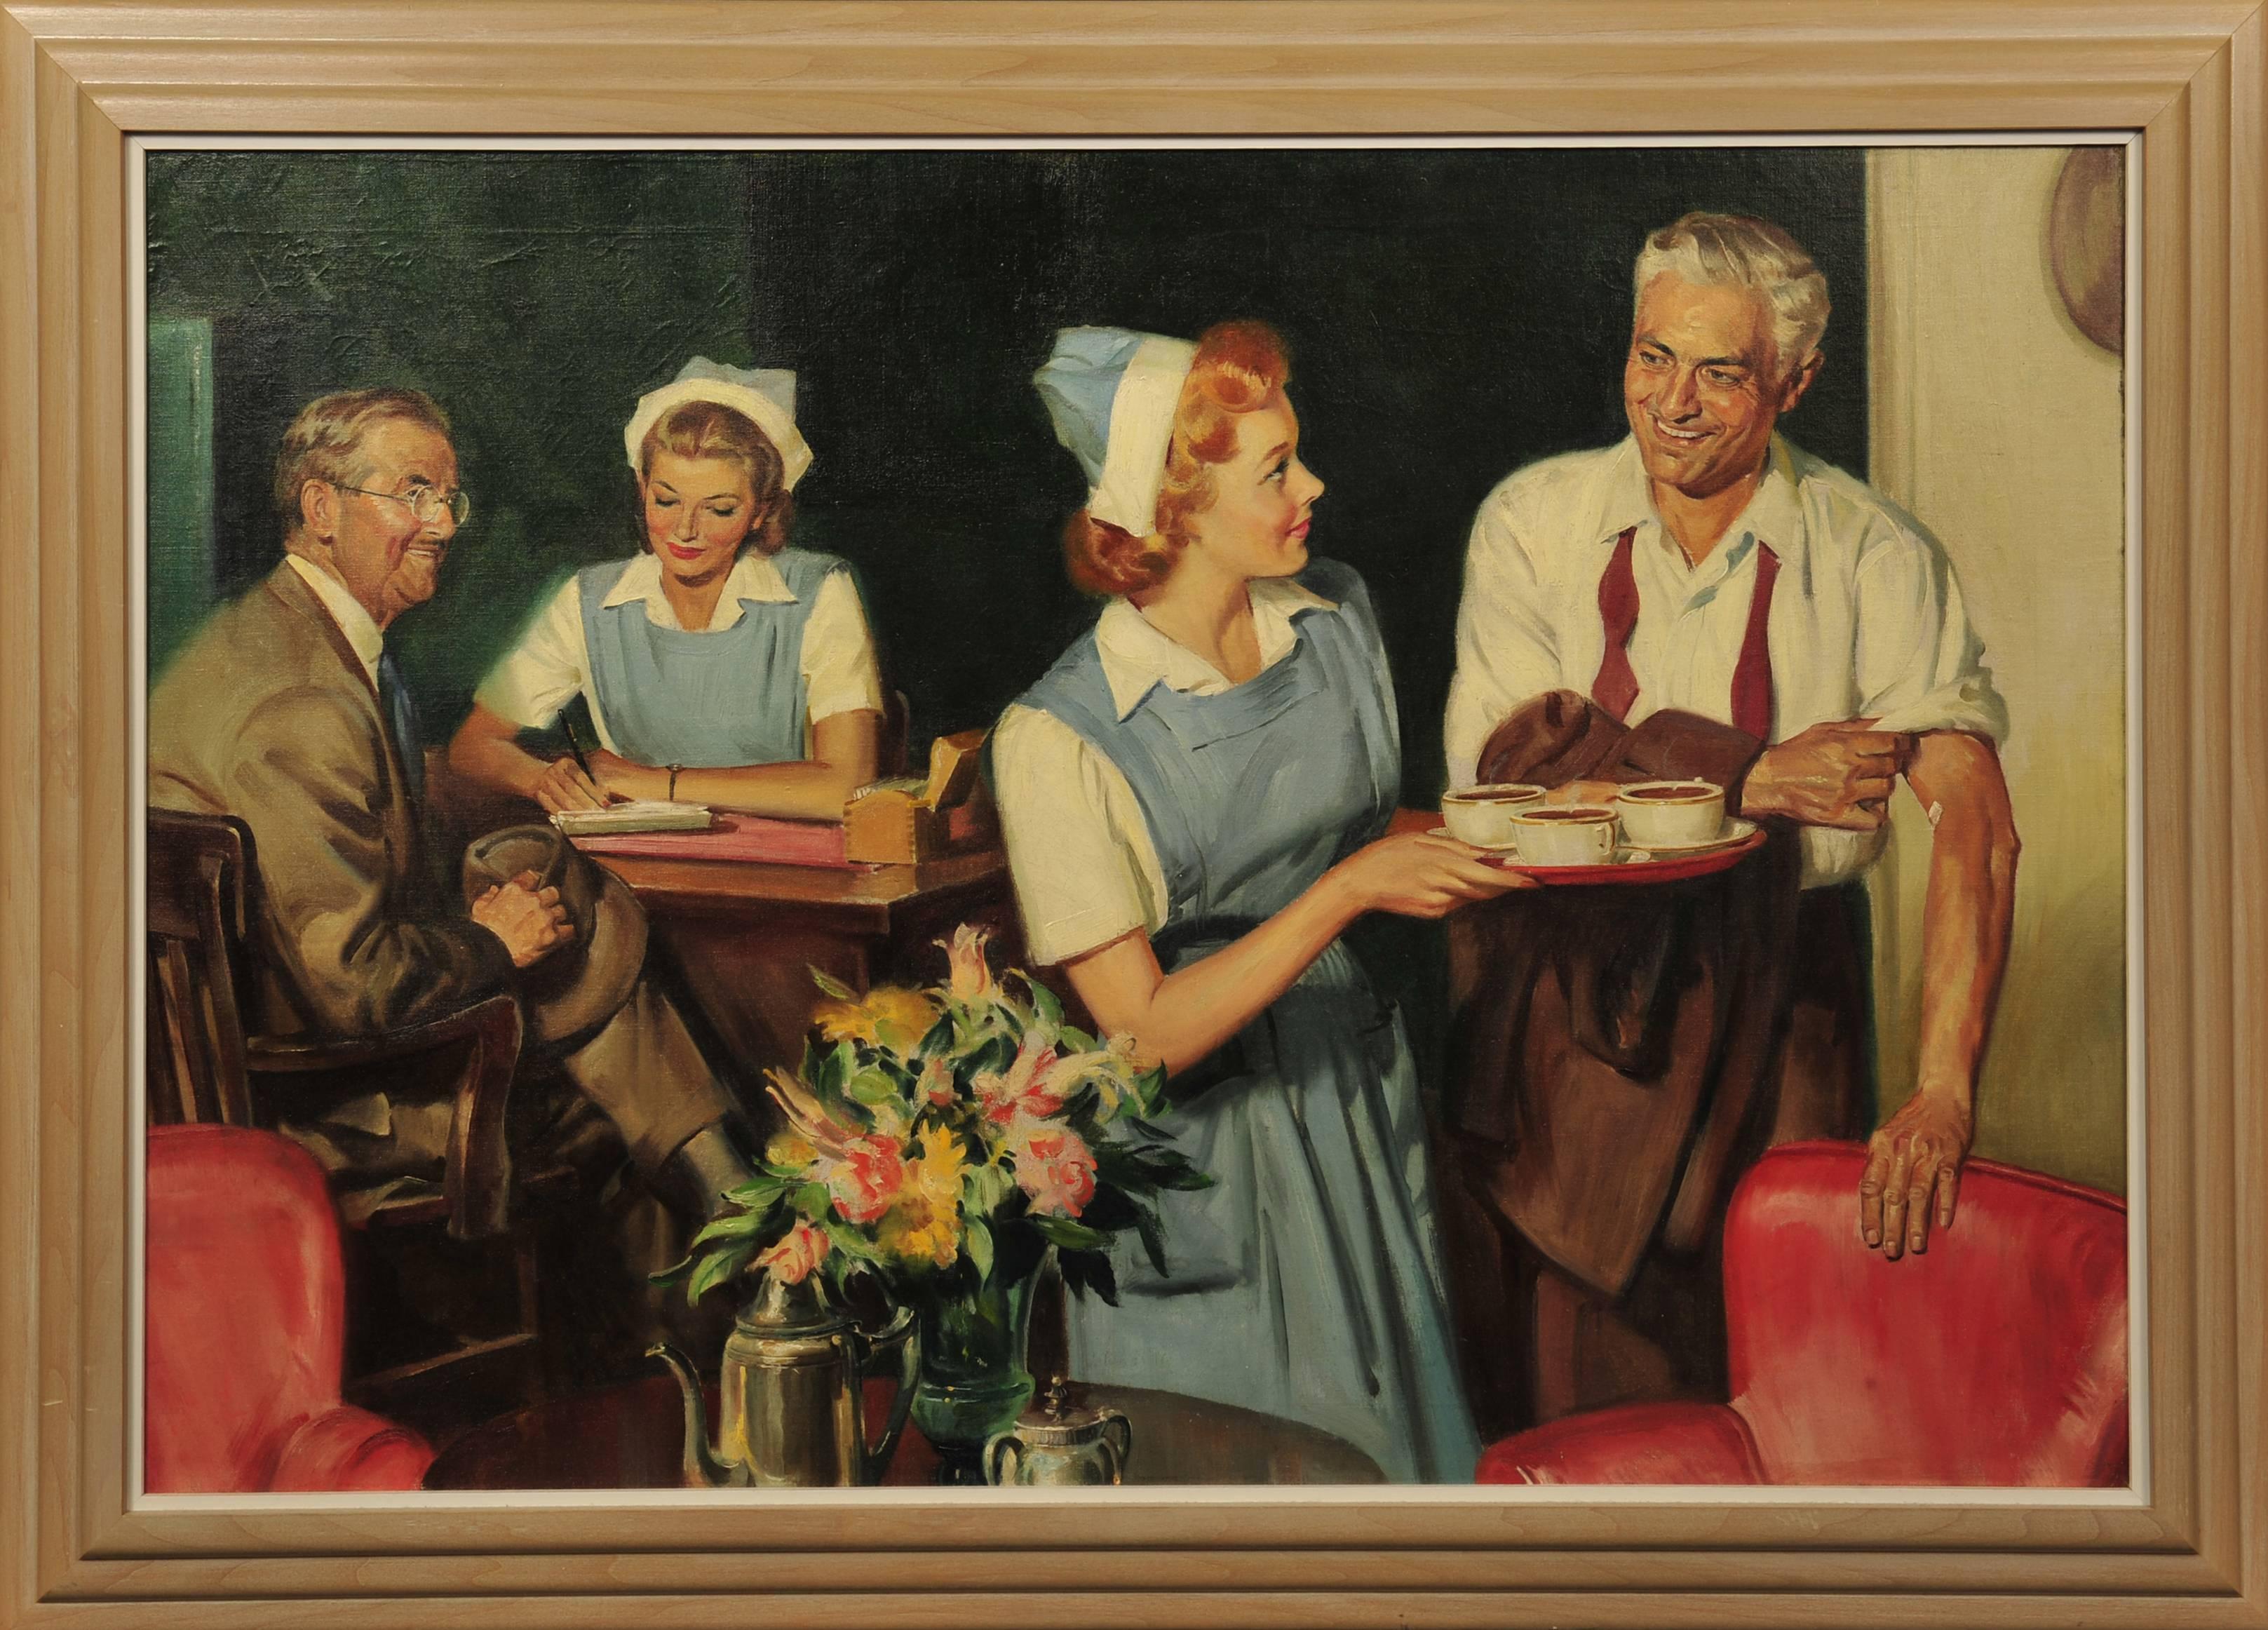 American Red Cross At Work - Painting by Wilson Jr. Mortimer